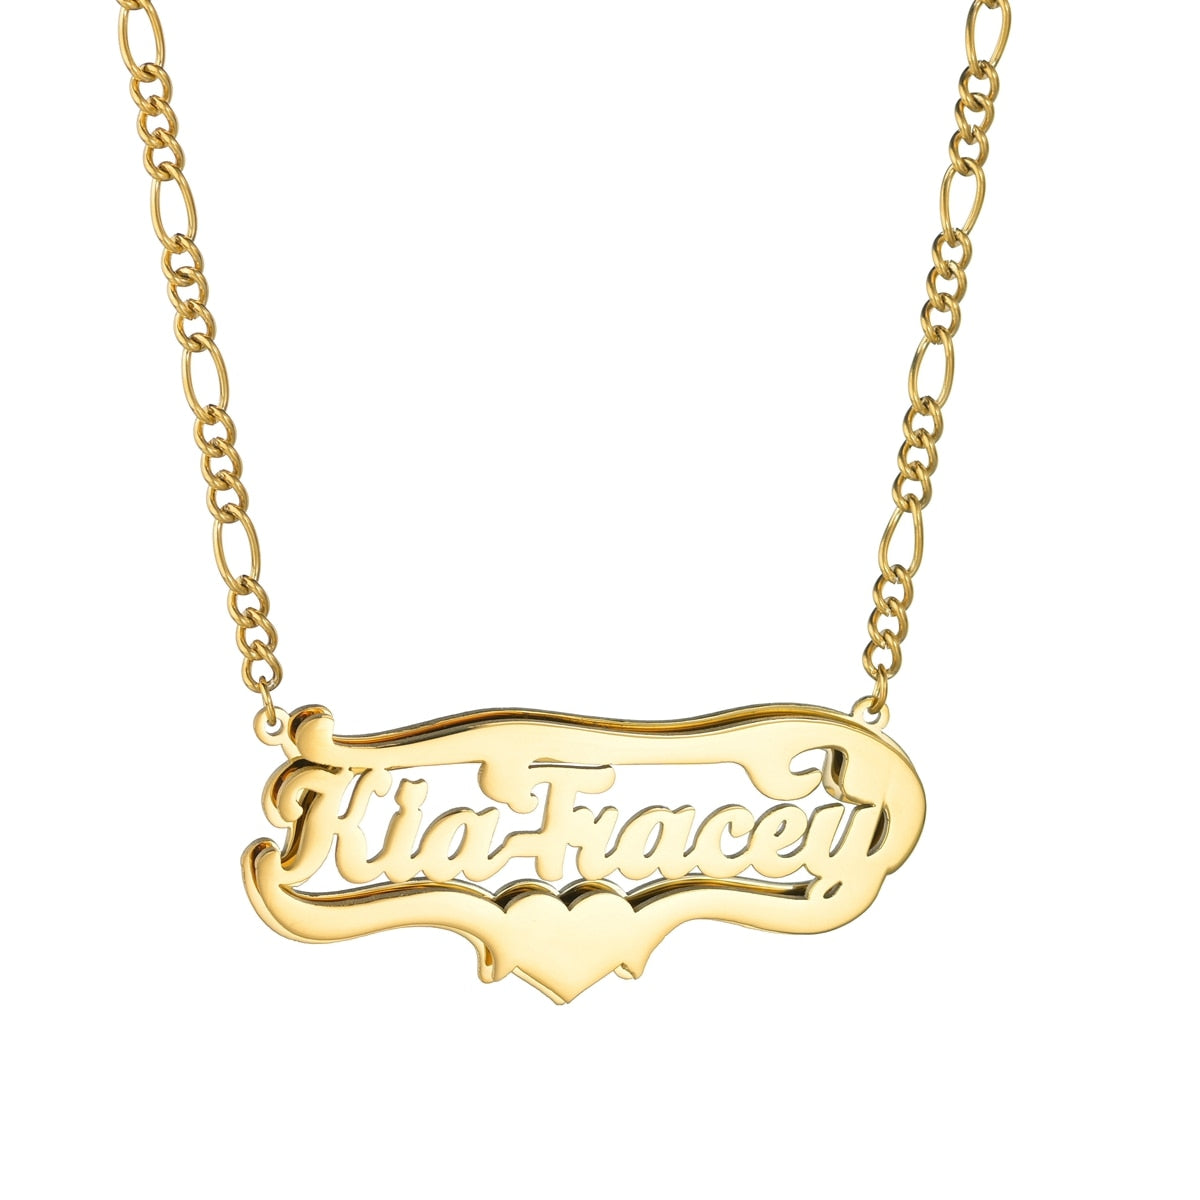 Replacement Chain for Name Necklace New Name Plate Chain Just the Chain for  Name Pendant Sterling Silver 952 or 18k Gold Plated -  Denmark